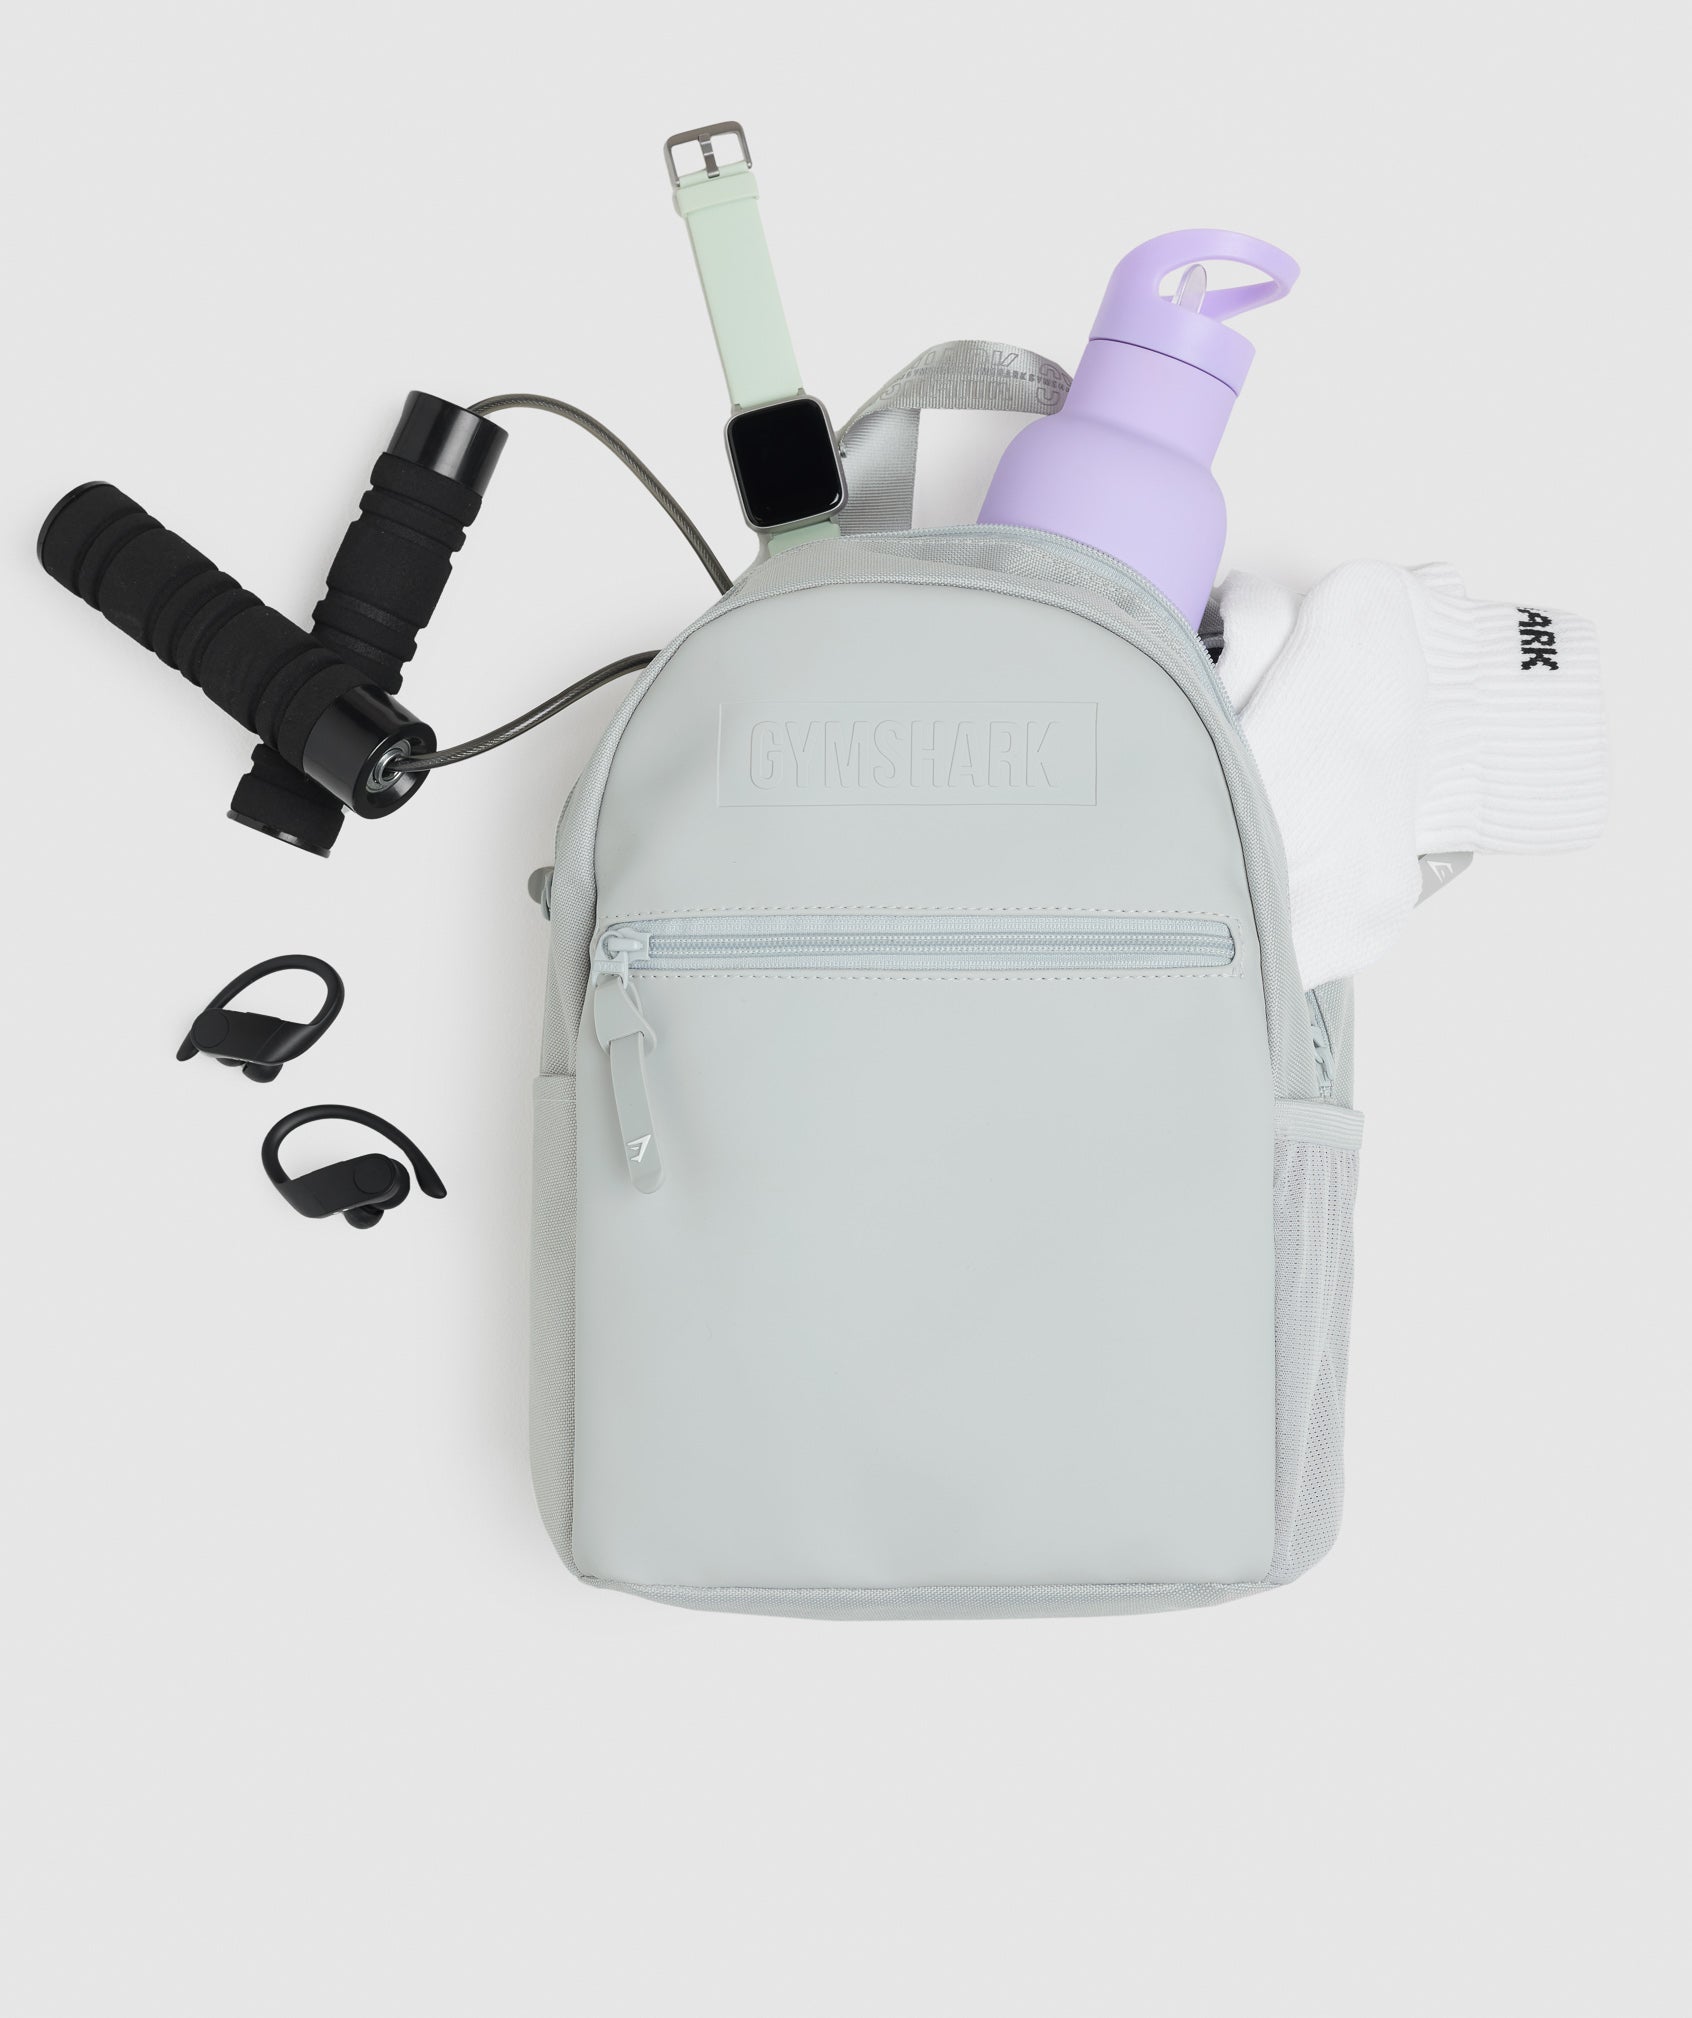 Everyday Mini Backpack in Light Grey - view 2